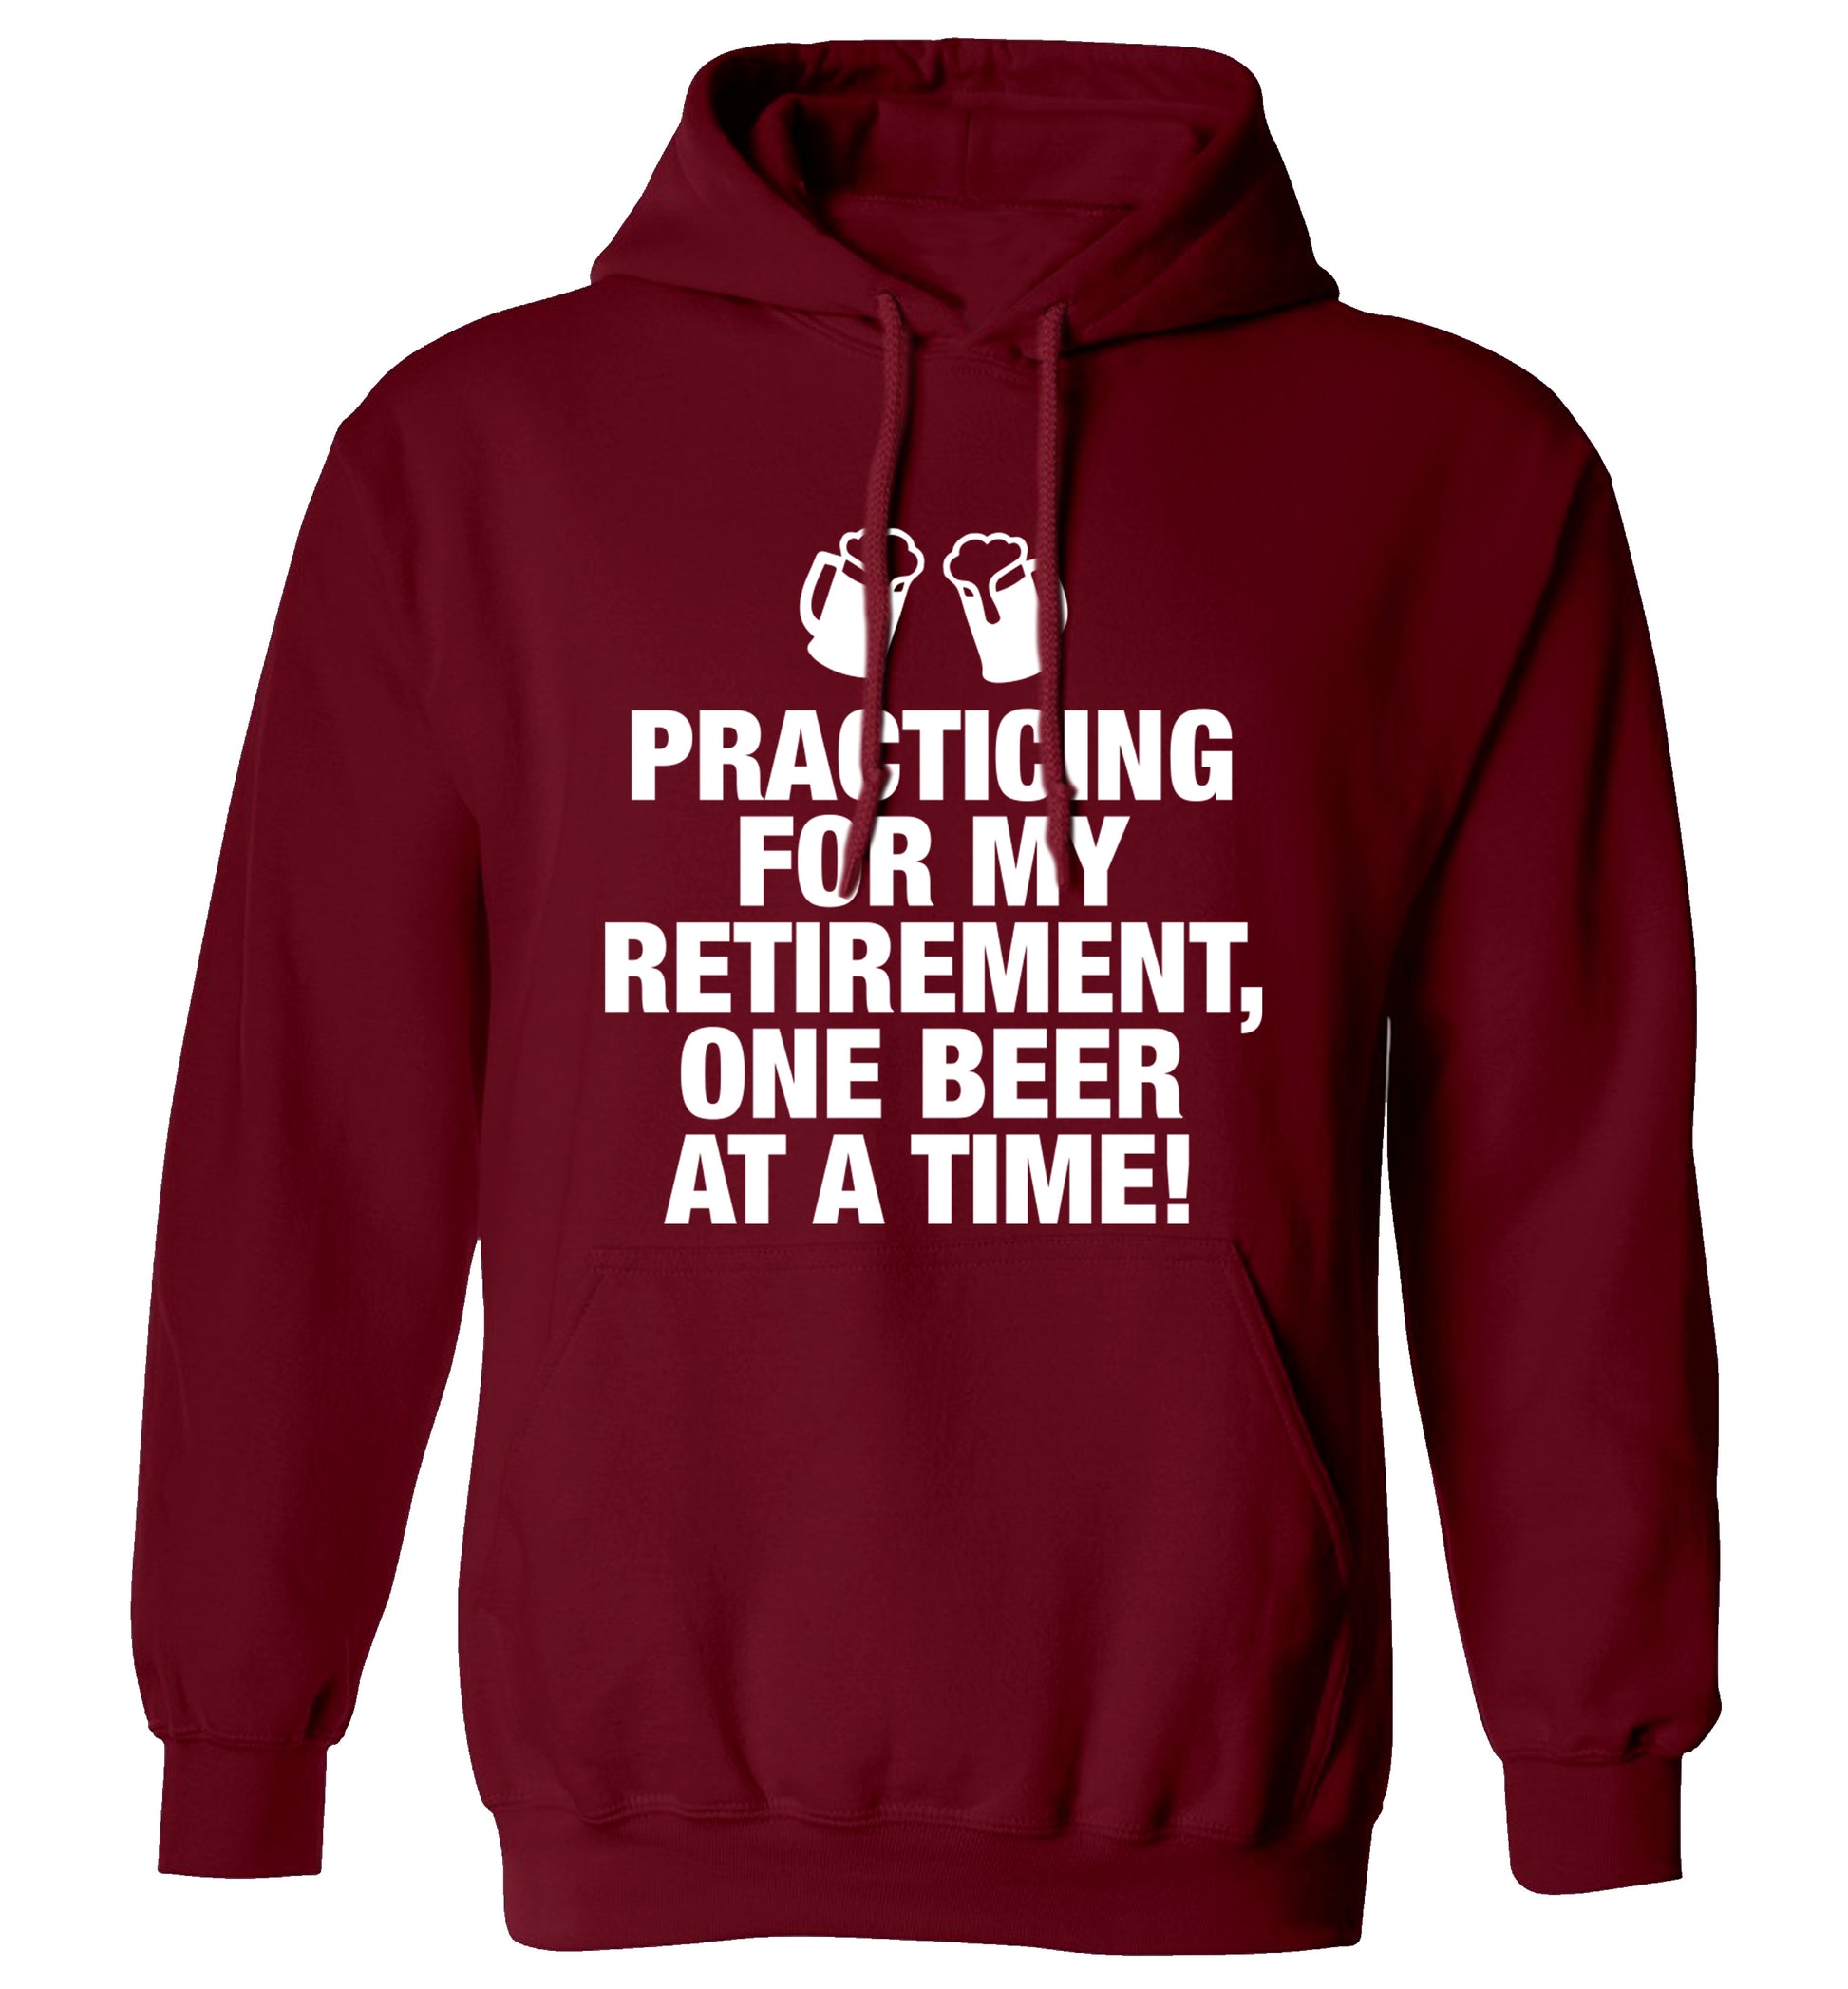 Practicing my retirement one beer at a time adults unisex maroon hoodie 2XL